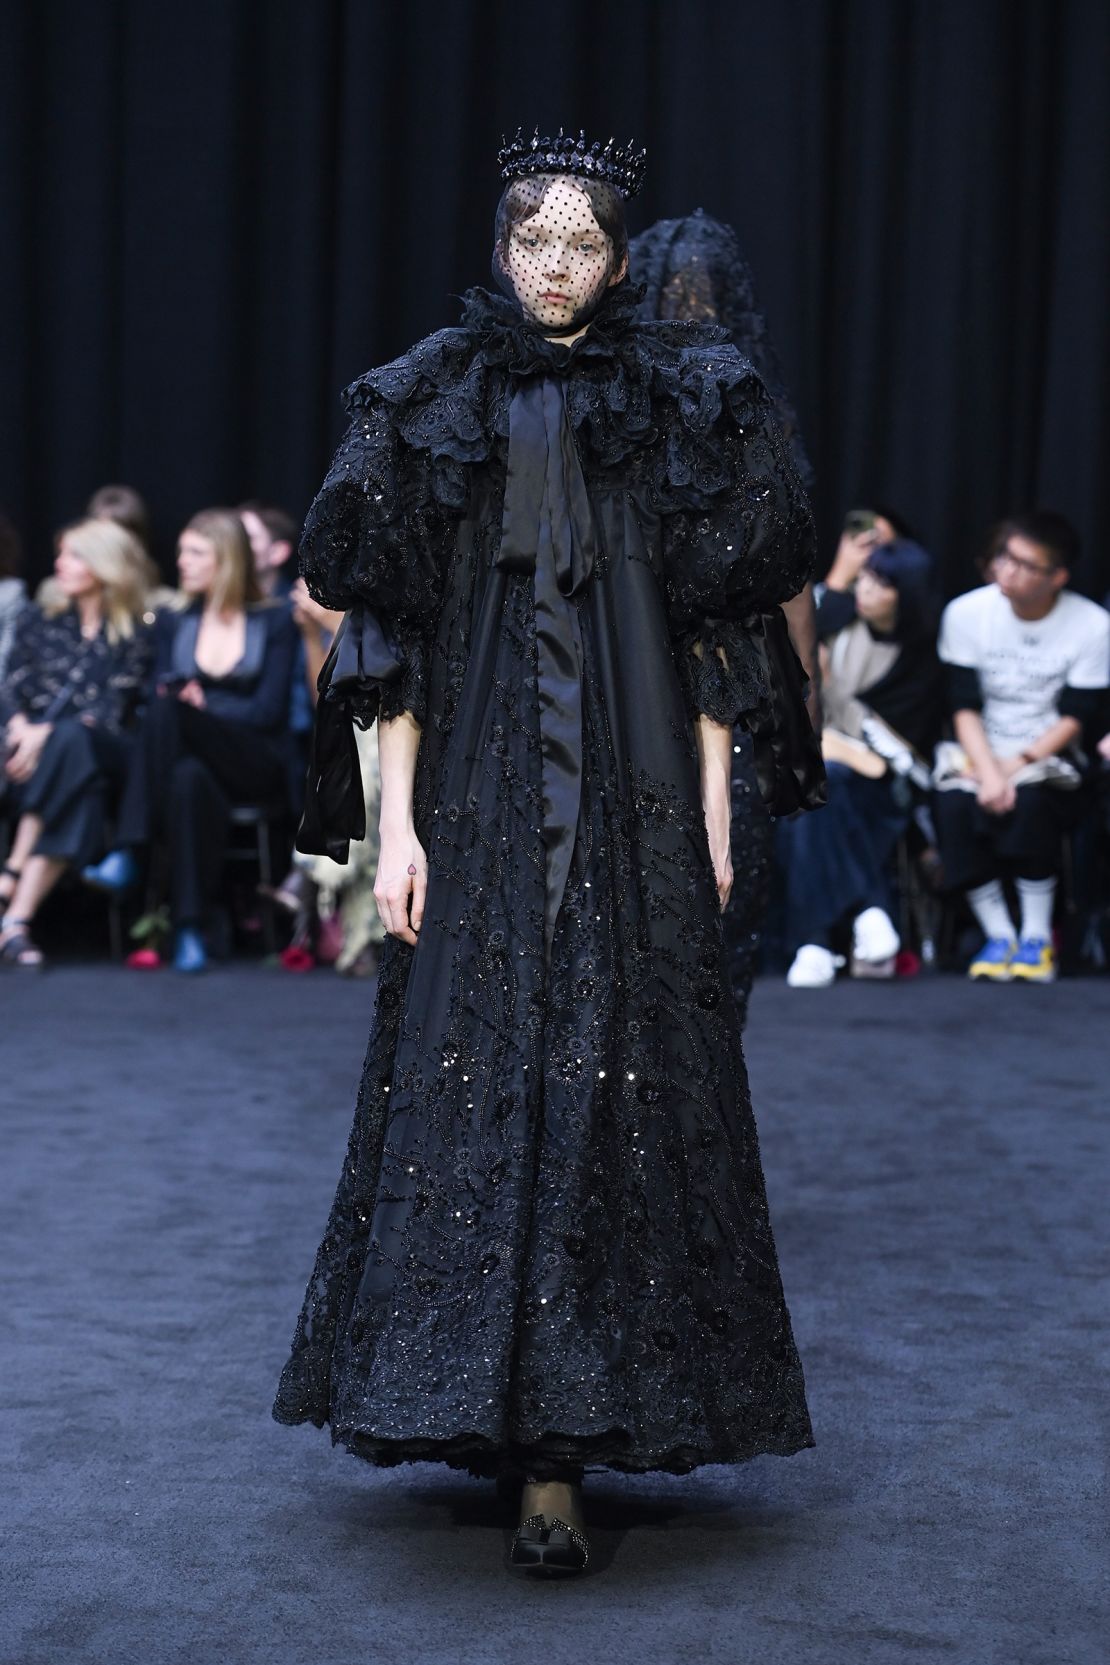 The first half of Richard Quinn's Spring-Summer 2023 show resembled a funeral procession: all-black, regal-inspired looks.